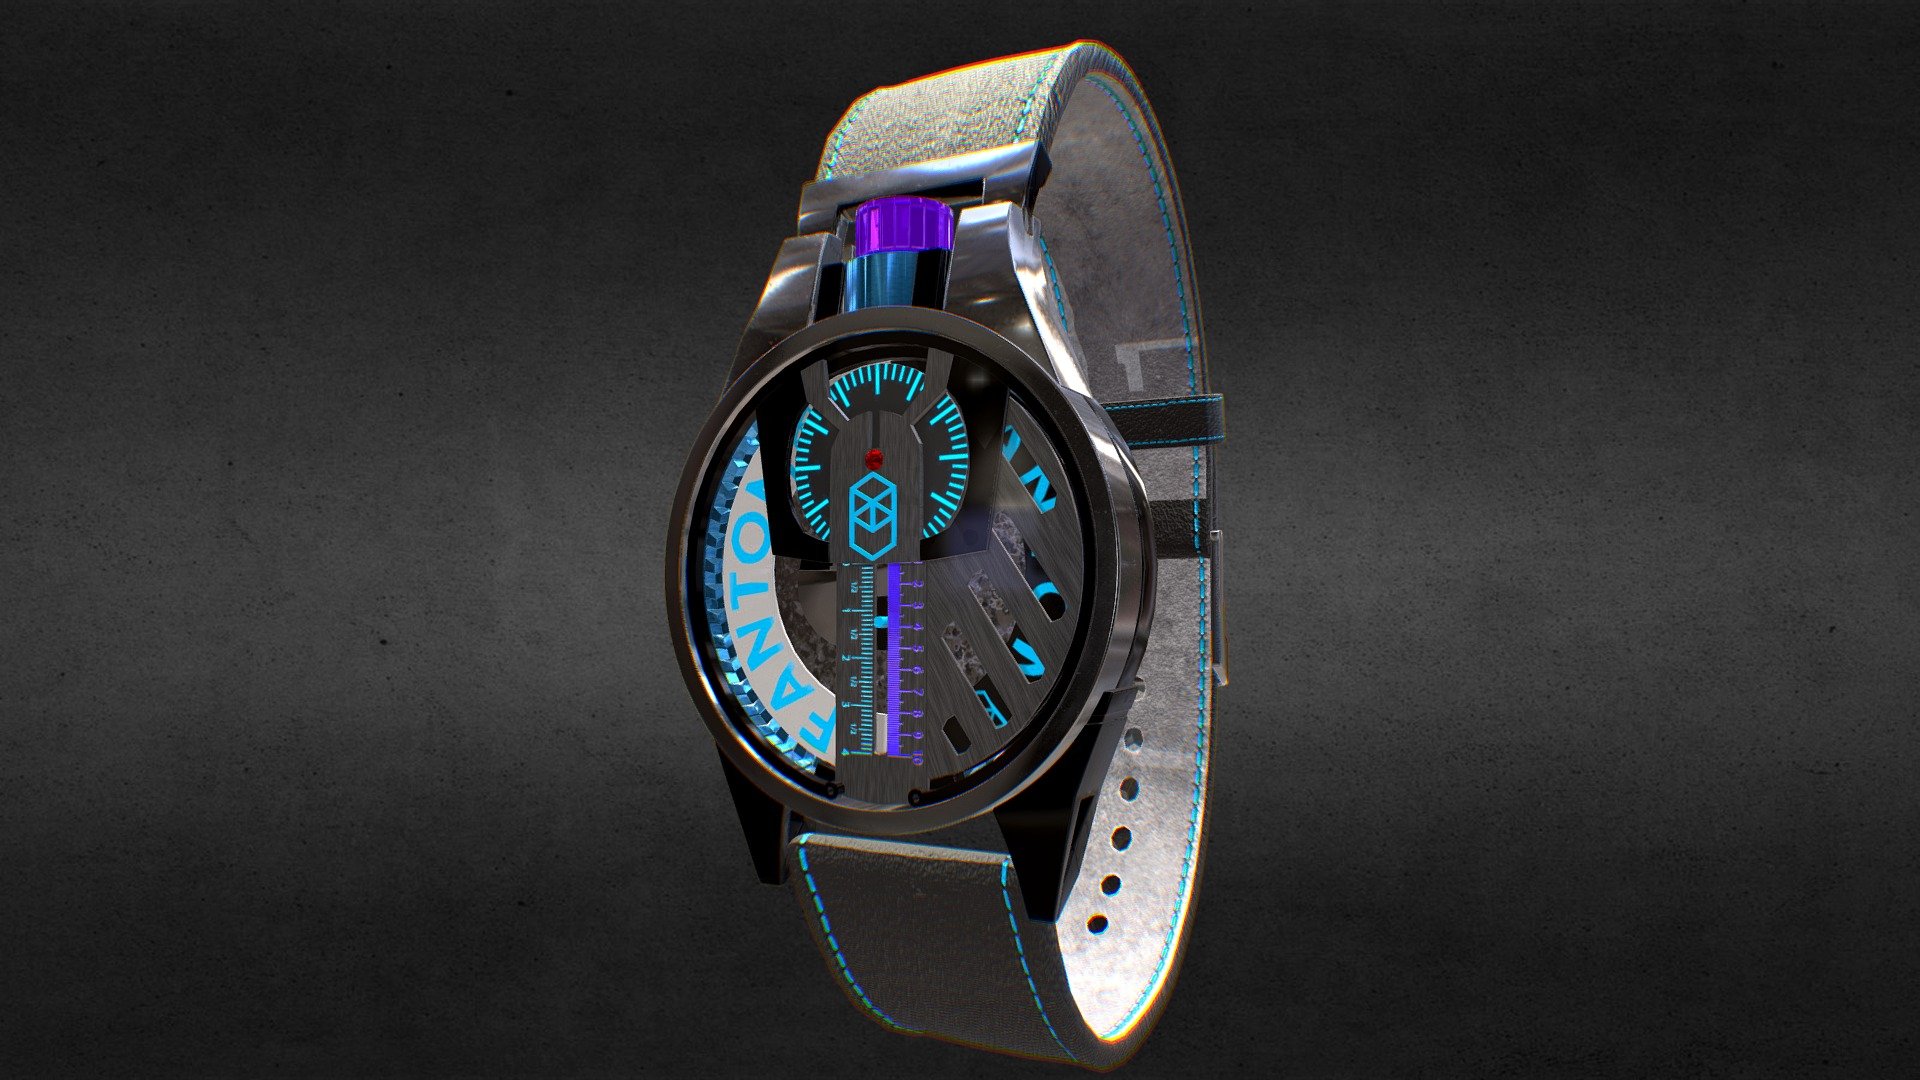 Awersome stainless steel Internet Fantom Coin Watch.

Currently available for download in FBX format.

3D model developed by AR-Watches 3d model